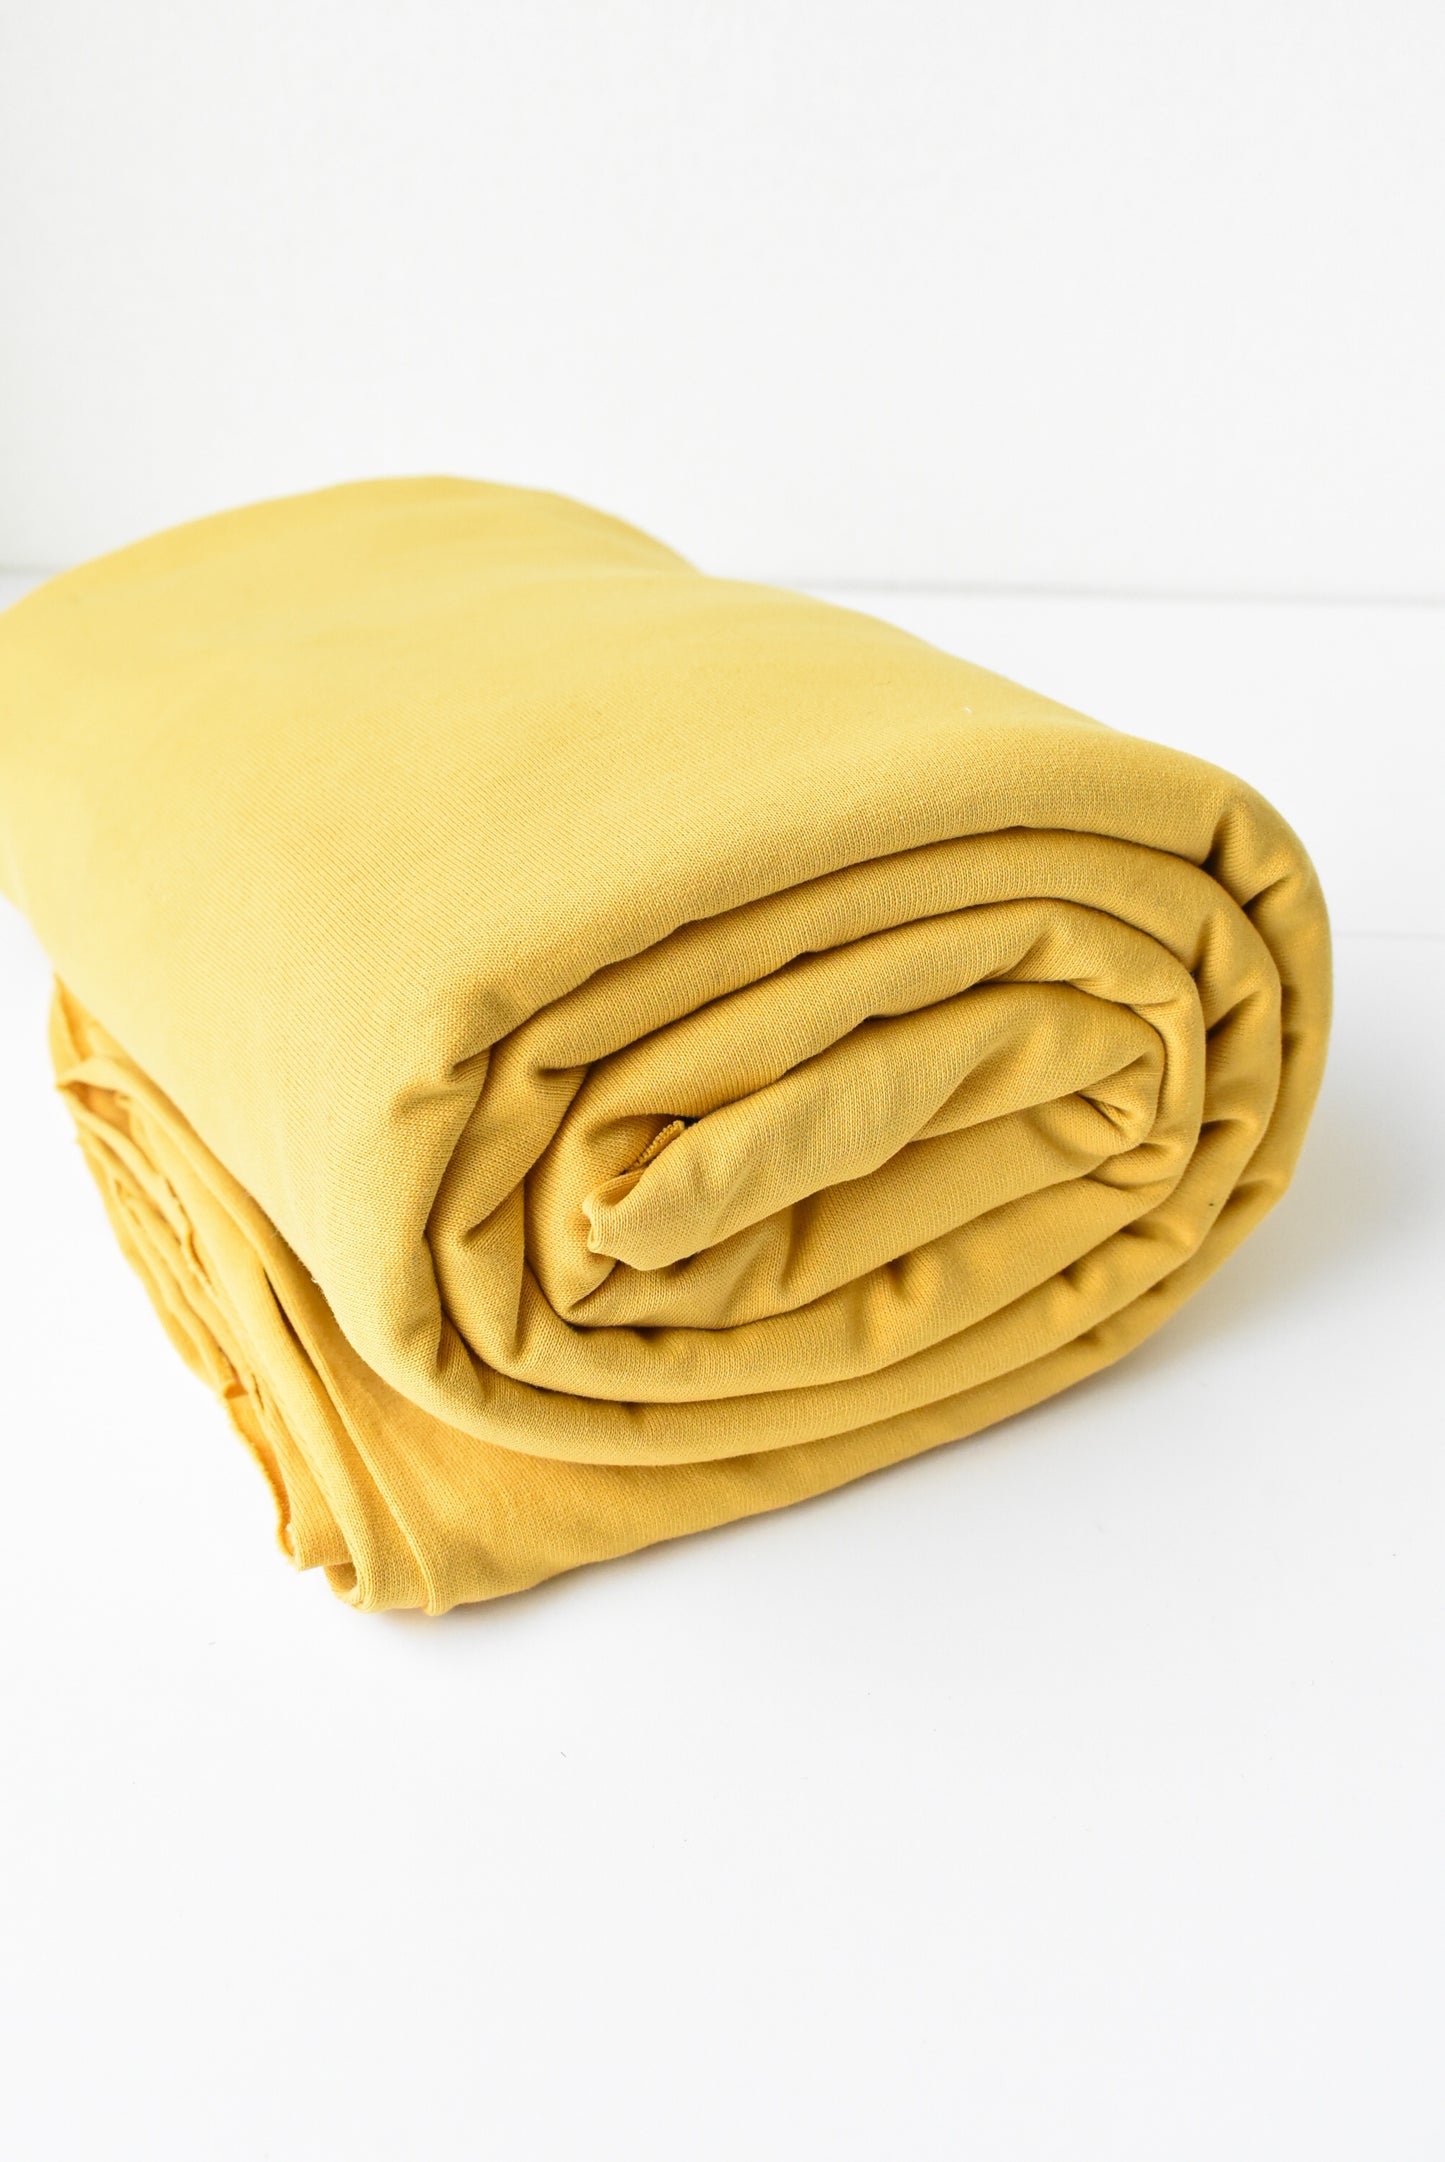 Roll of golden yellow fabric